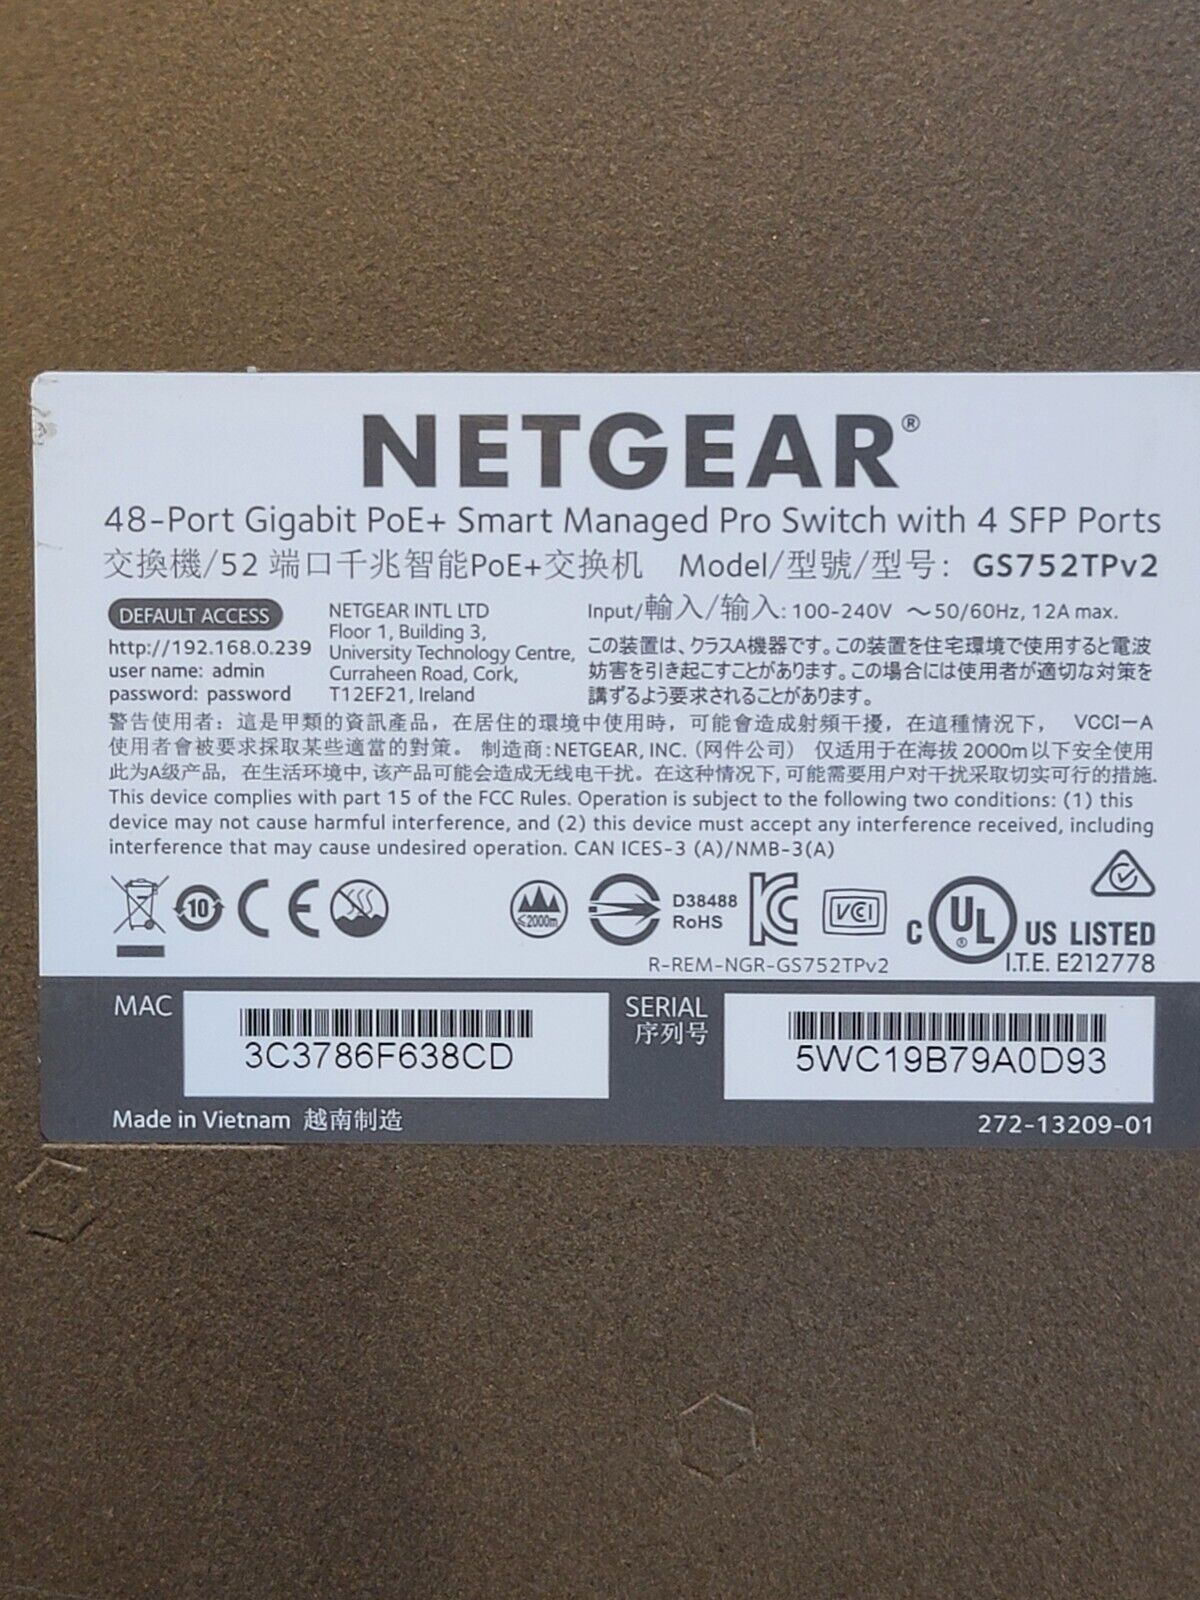 NETGEAR GS752TP V2 48-Port POE ETHERNET SWITCH Does Not Appear To Have Been Used